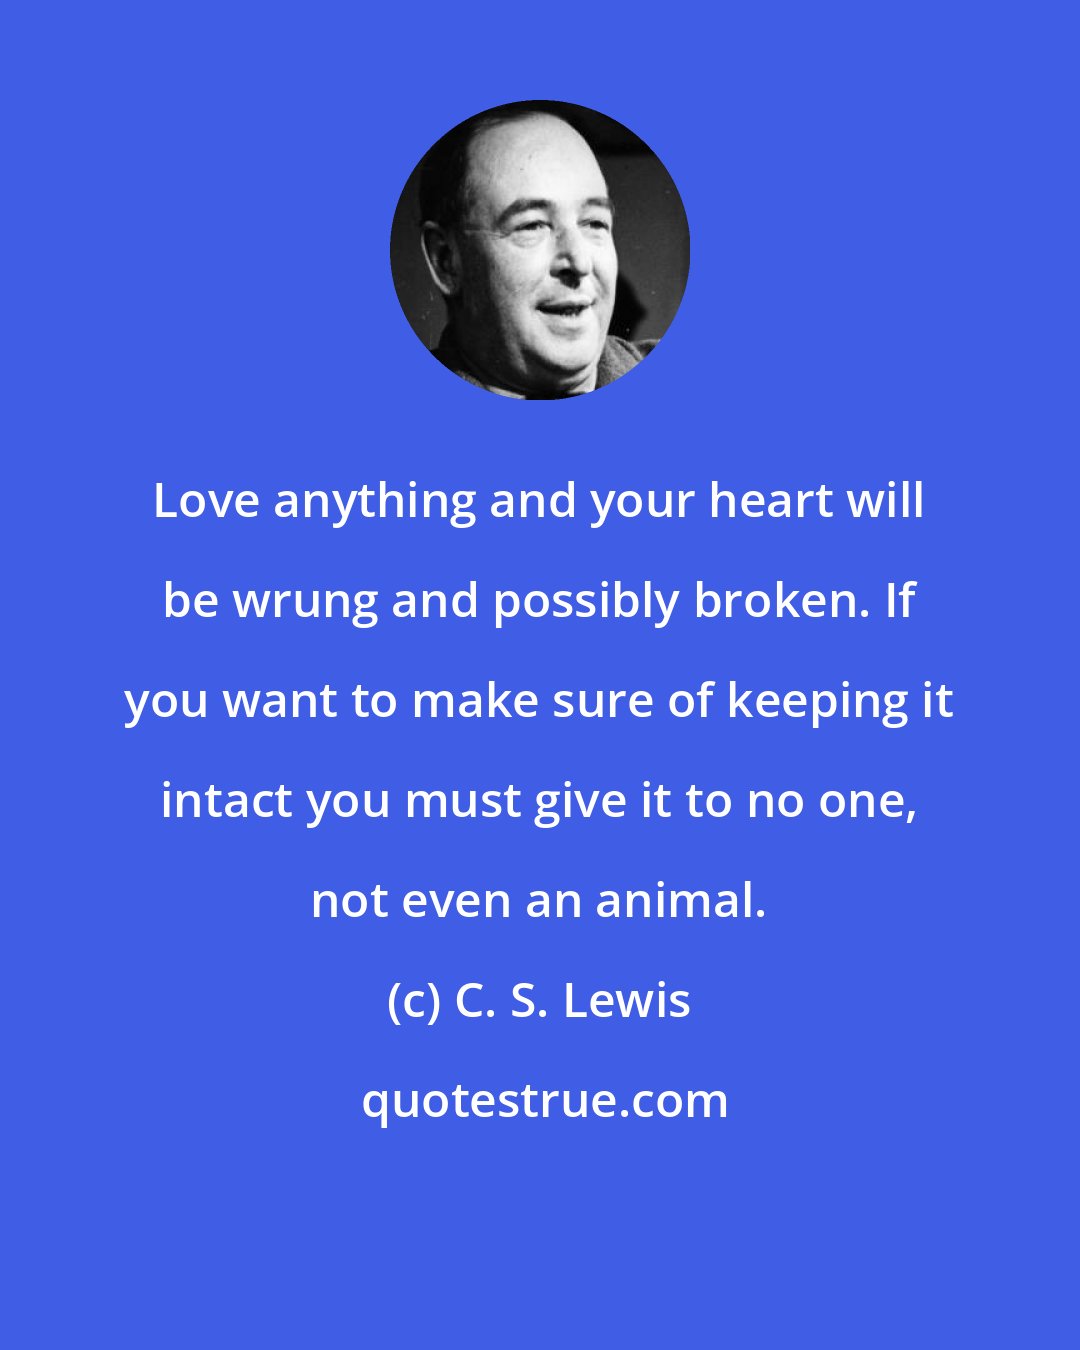 C. S. Lewis: Love anything and your heart will be wrung and possibly broken. If you want to make sure of keeping it intact you must give it to no one, not even an animal.